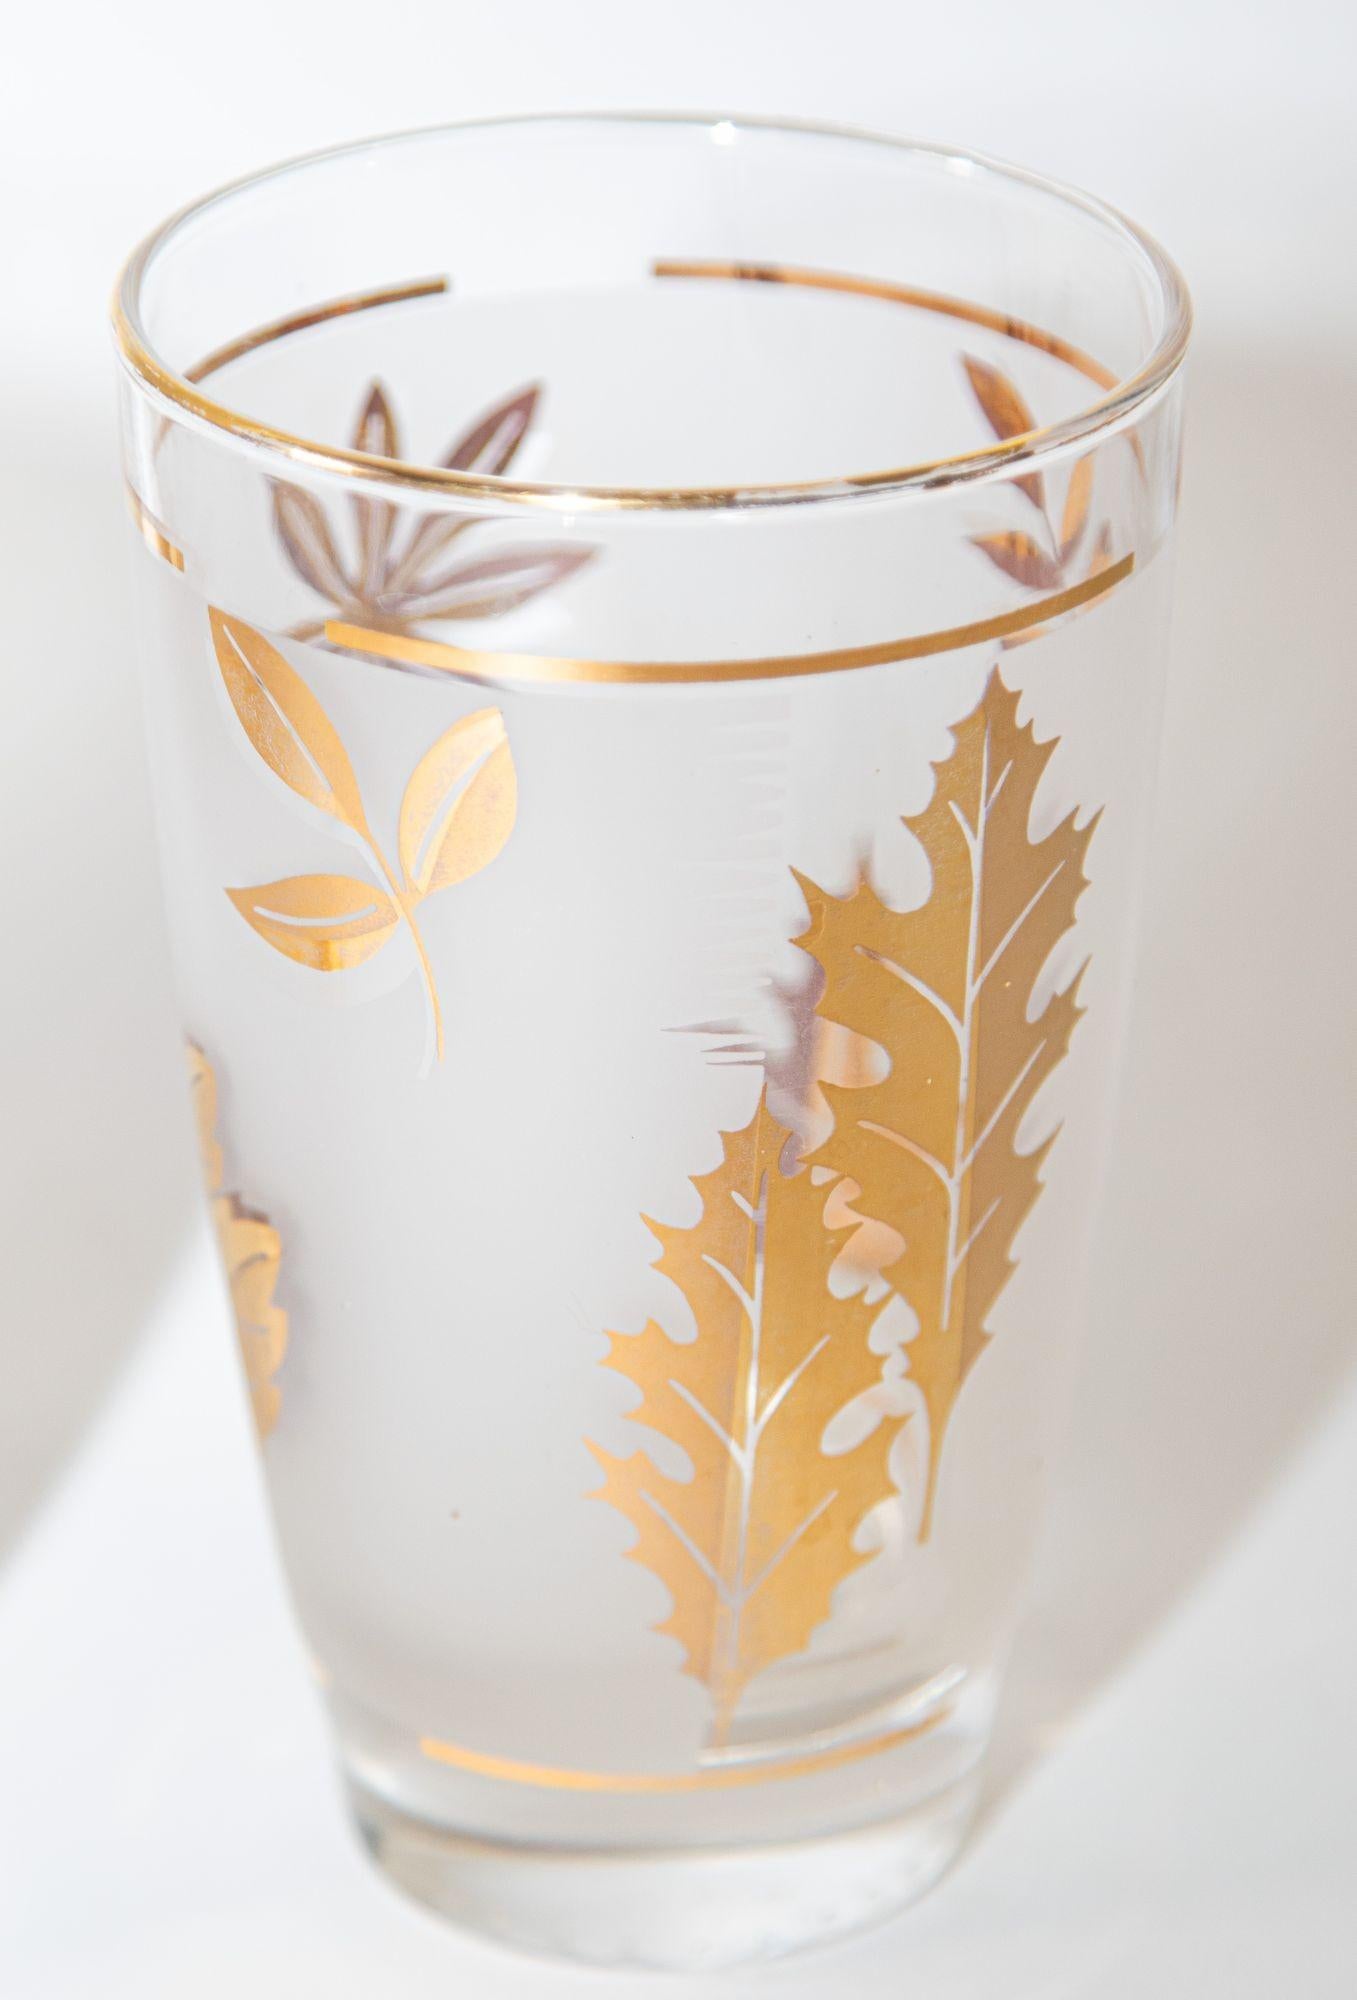 Vintage Libbey Frosted & Golden Foliage Cocktail Glasses, Set of 4 In Good Condition For Sale In North Hollywood, CA